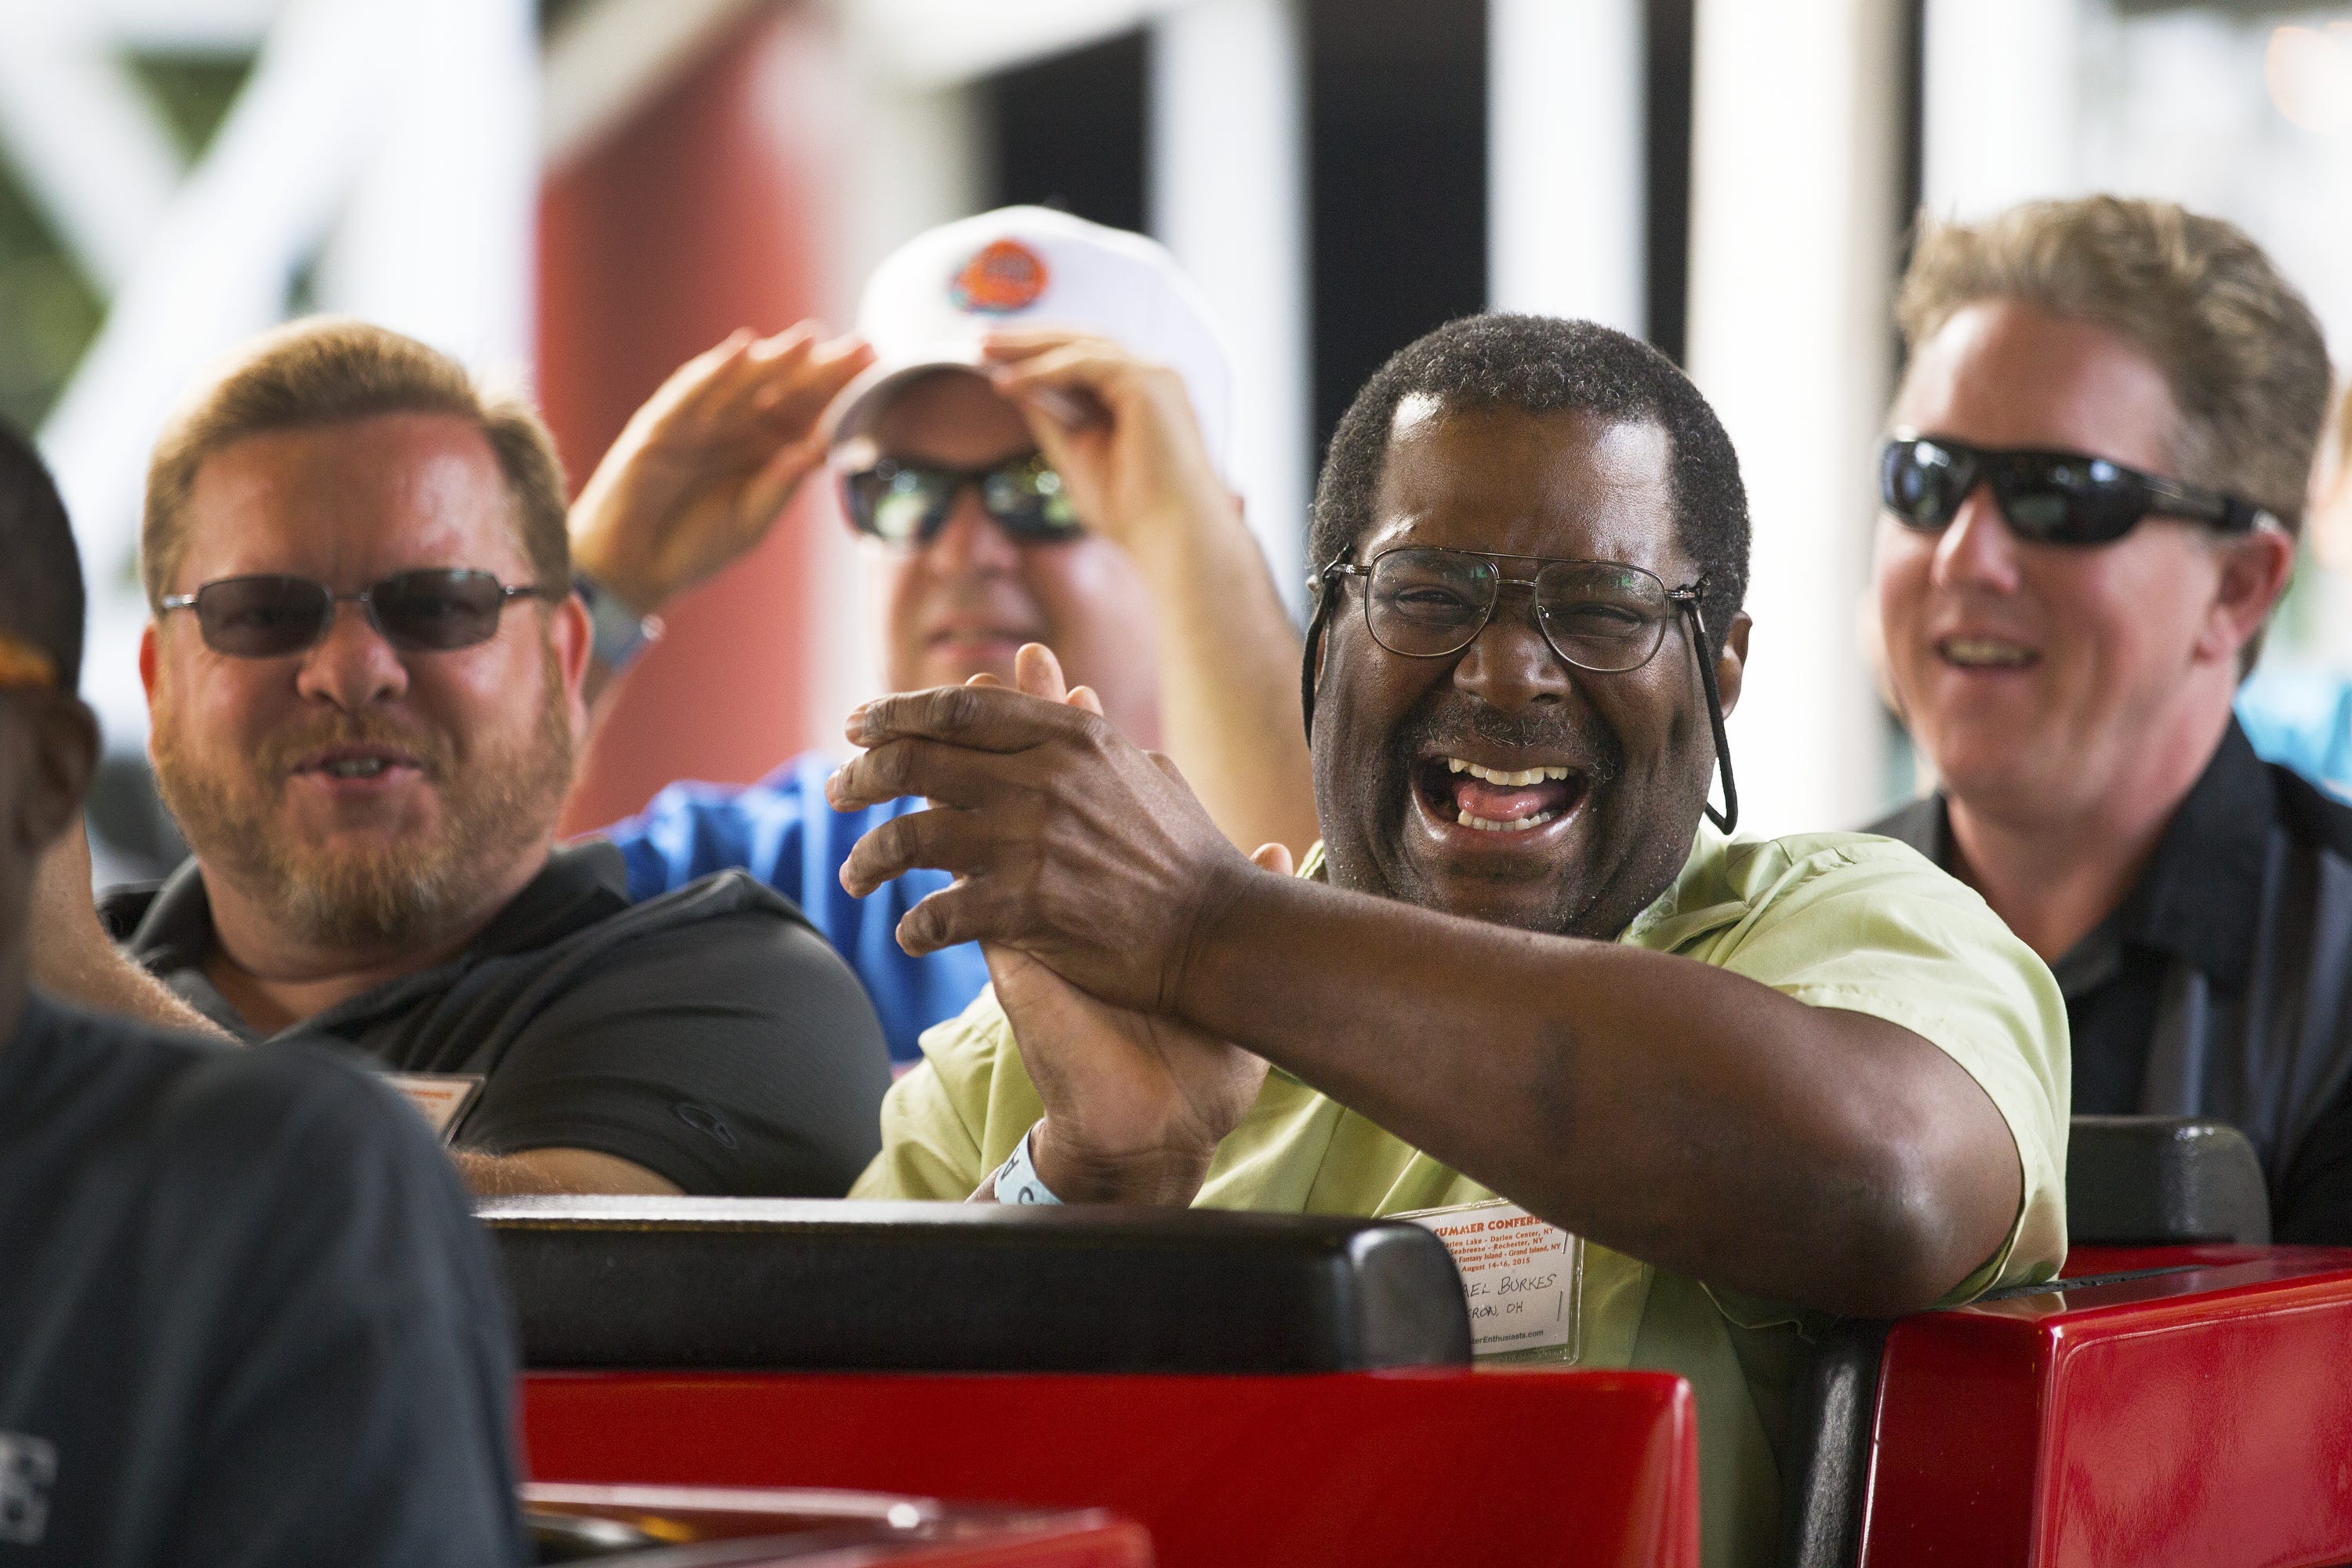 American Coaster Enthusiast Michael Burkess of Akron, Ohio laughs  after riding the Jack Rabbit at Seabreeze Amusement Park.  August 15, 2015.